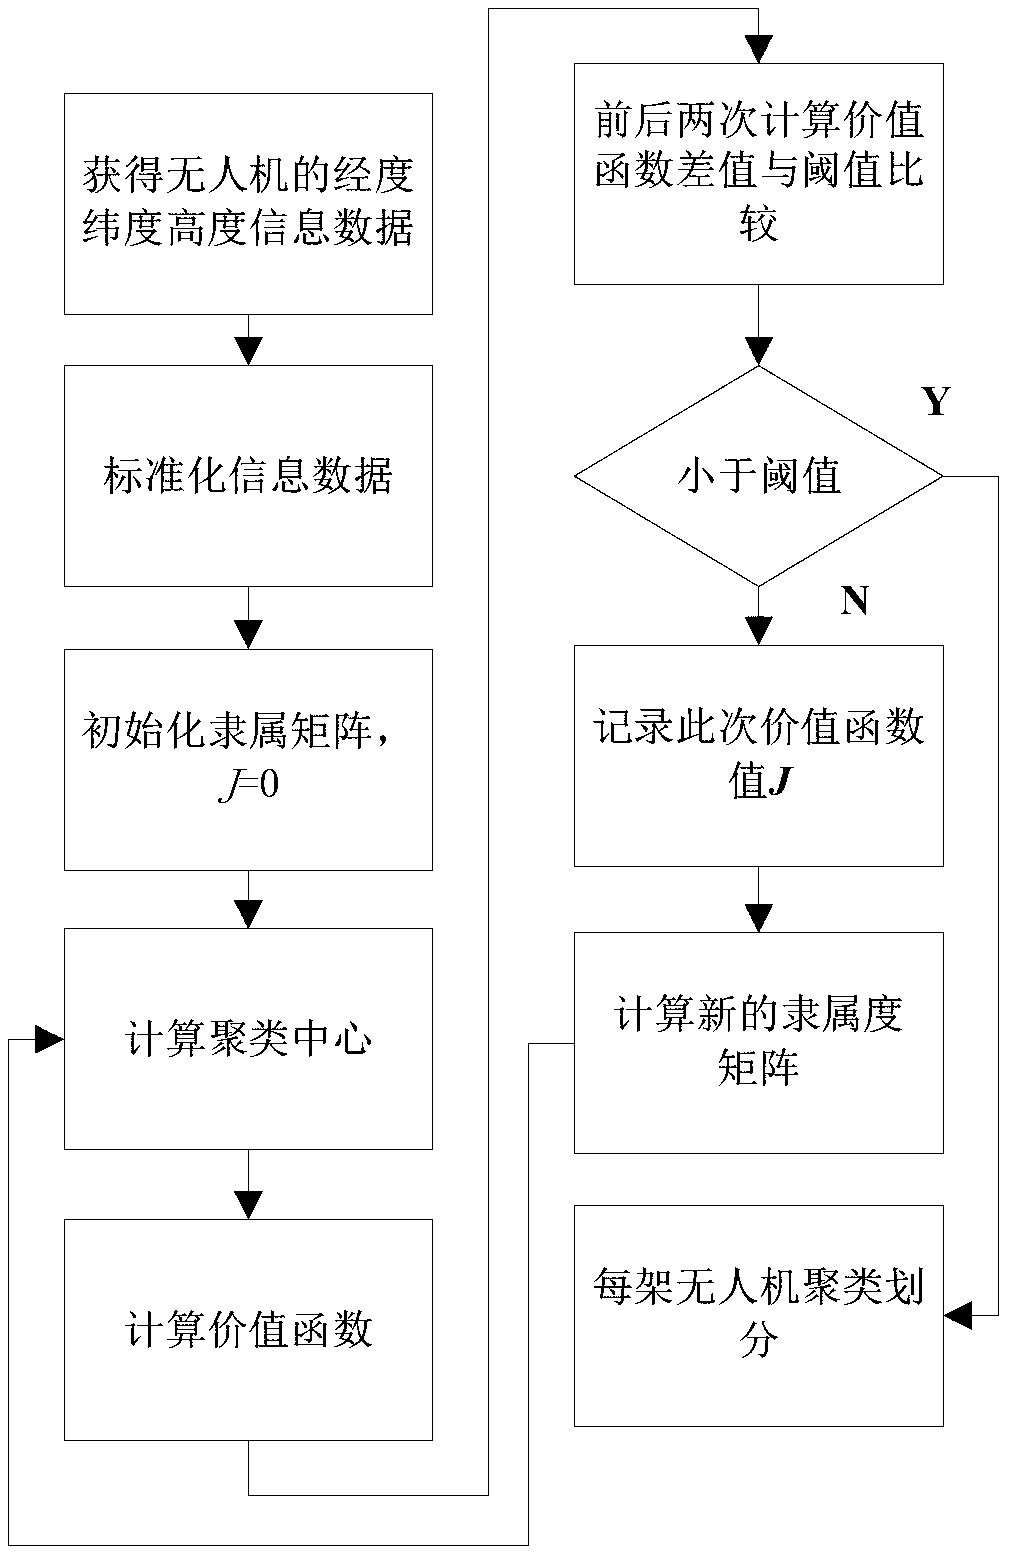 Multiple unmanned aerial vehicle formation partition method